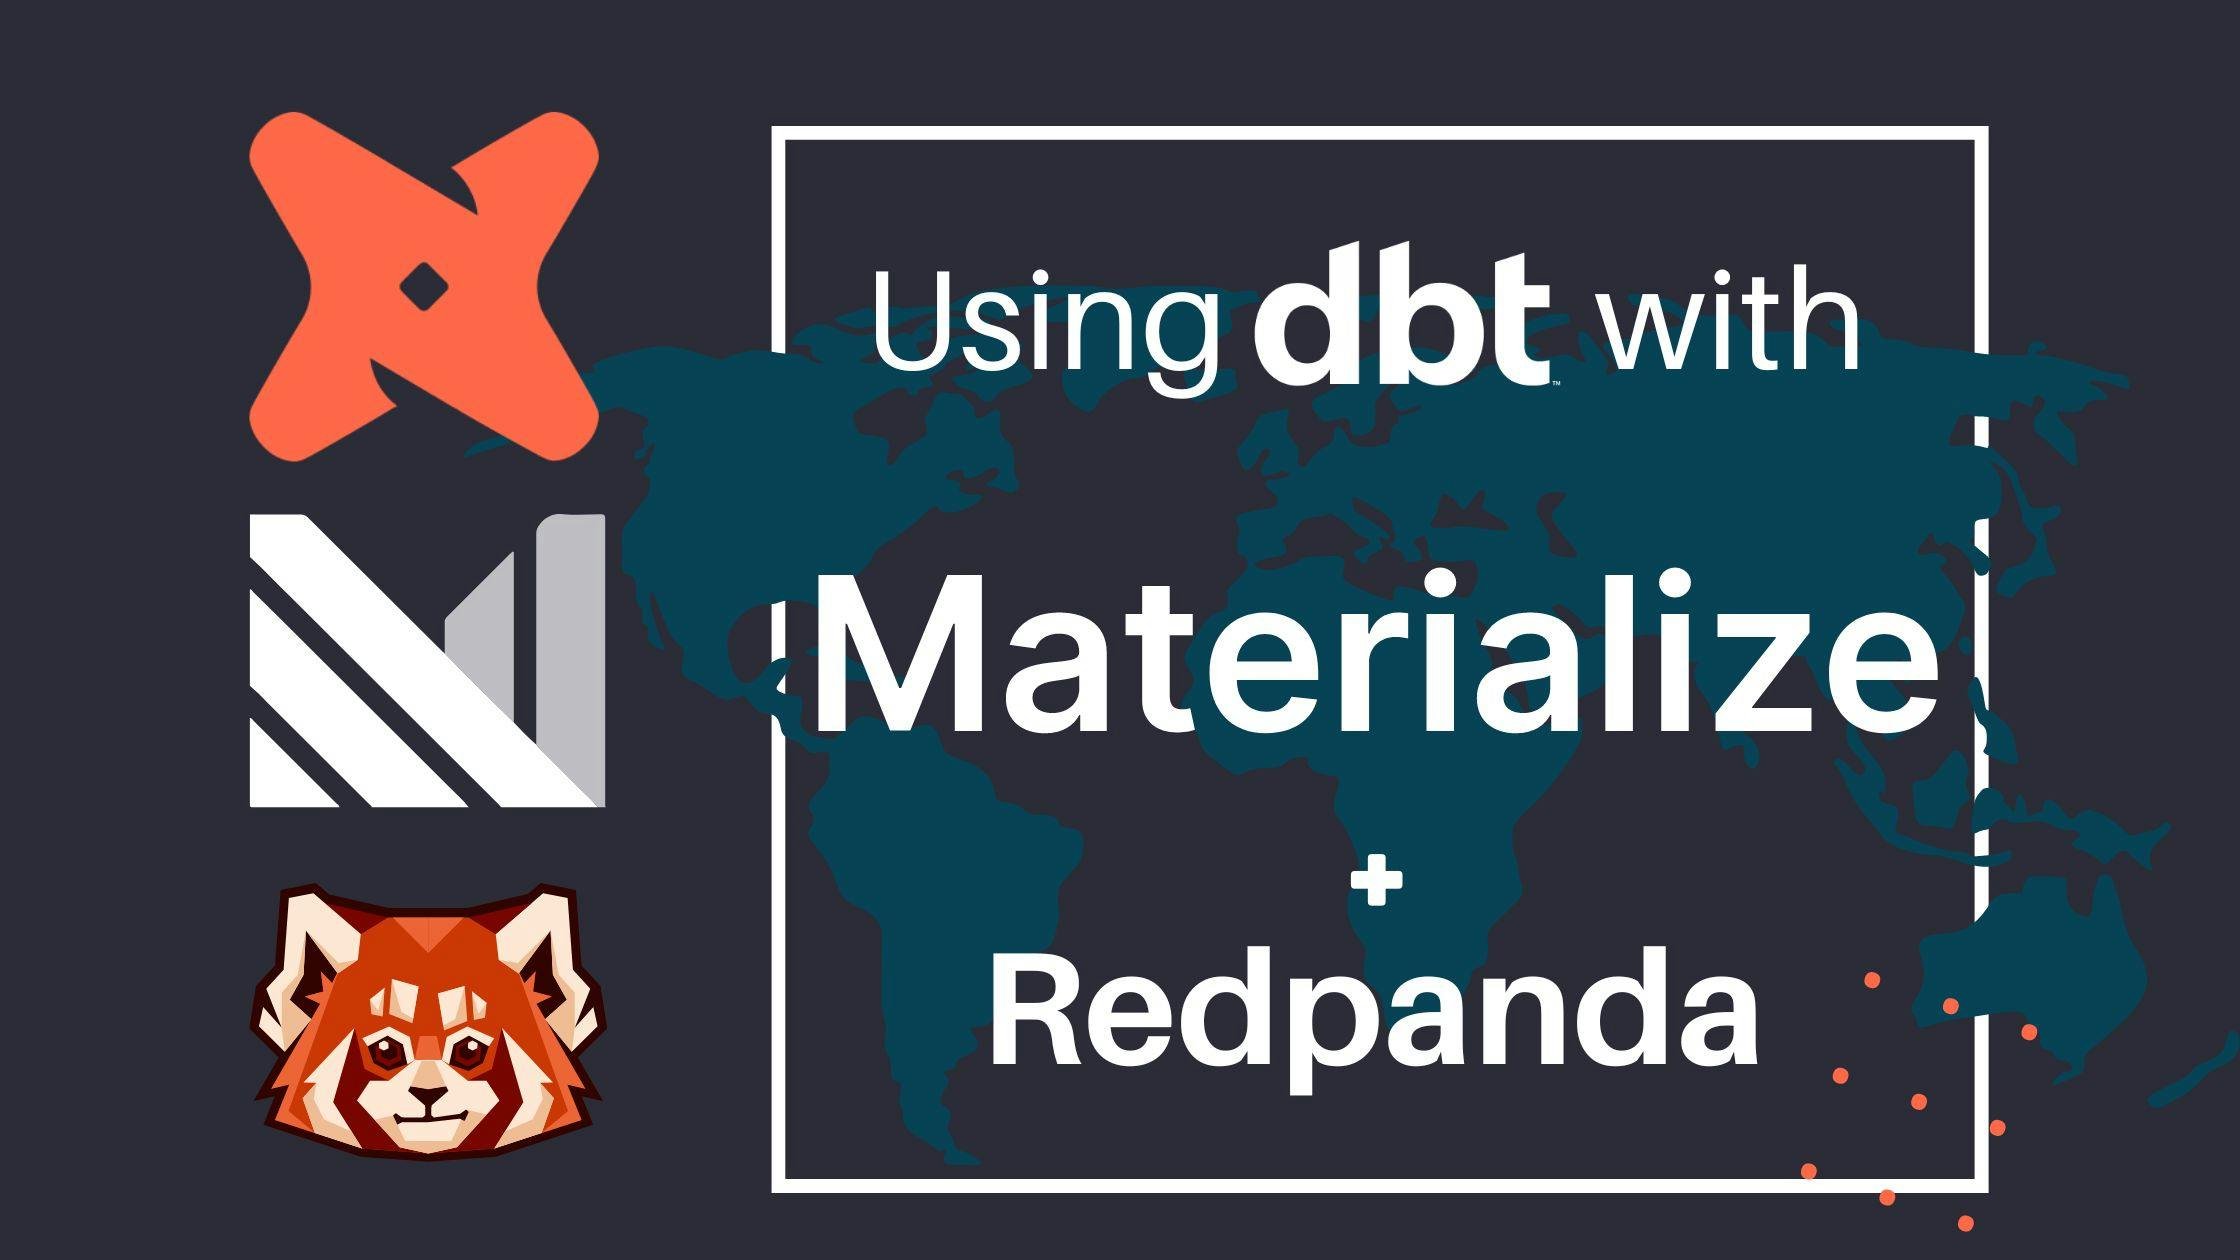 featured image - Using dbt with Materialize and Redpanda